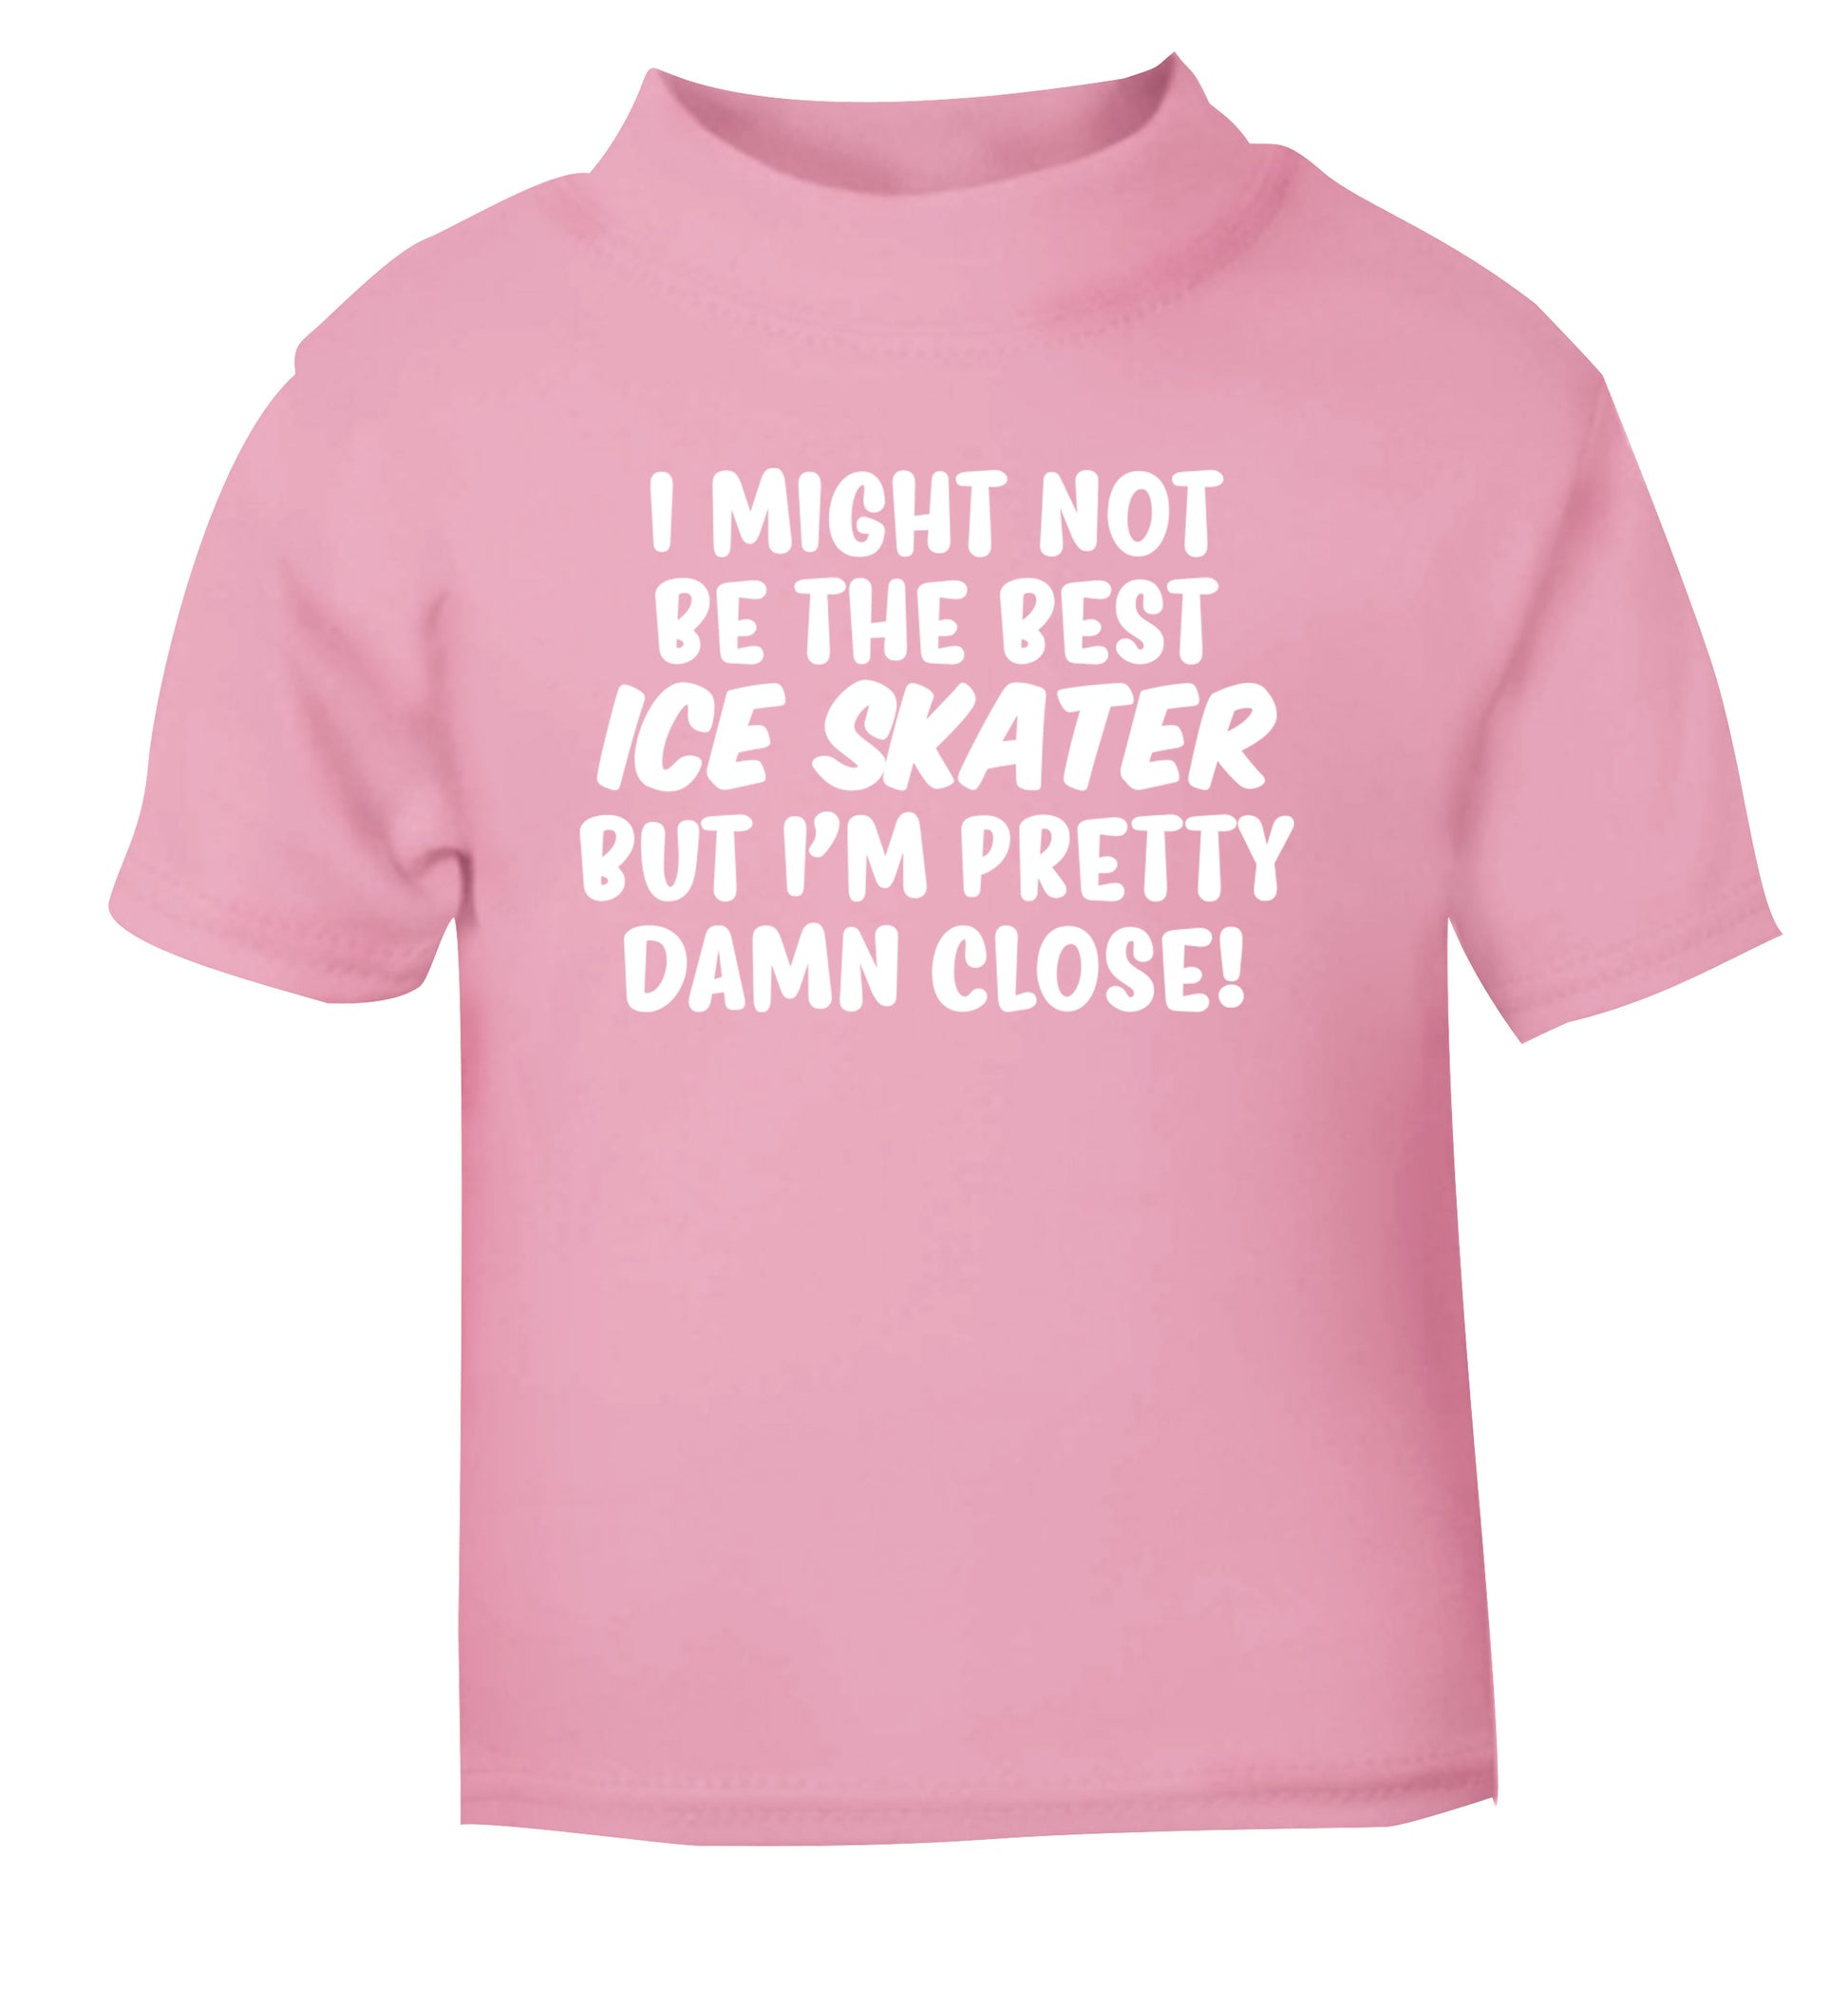 I might not be the best ice skater but I'm pretty damn close! light pink Baby Toddler Tshirt 2 Years